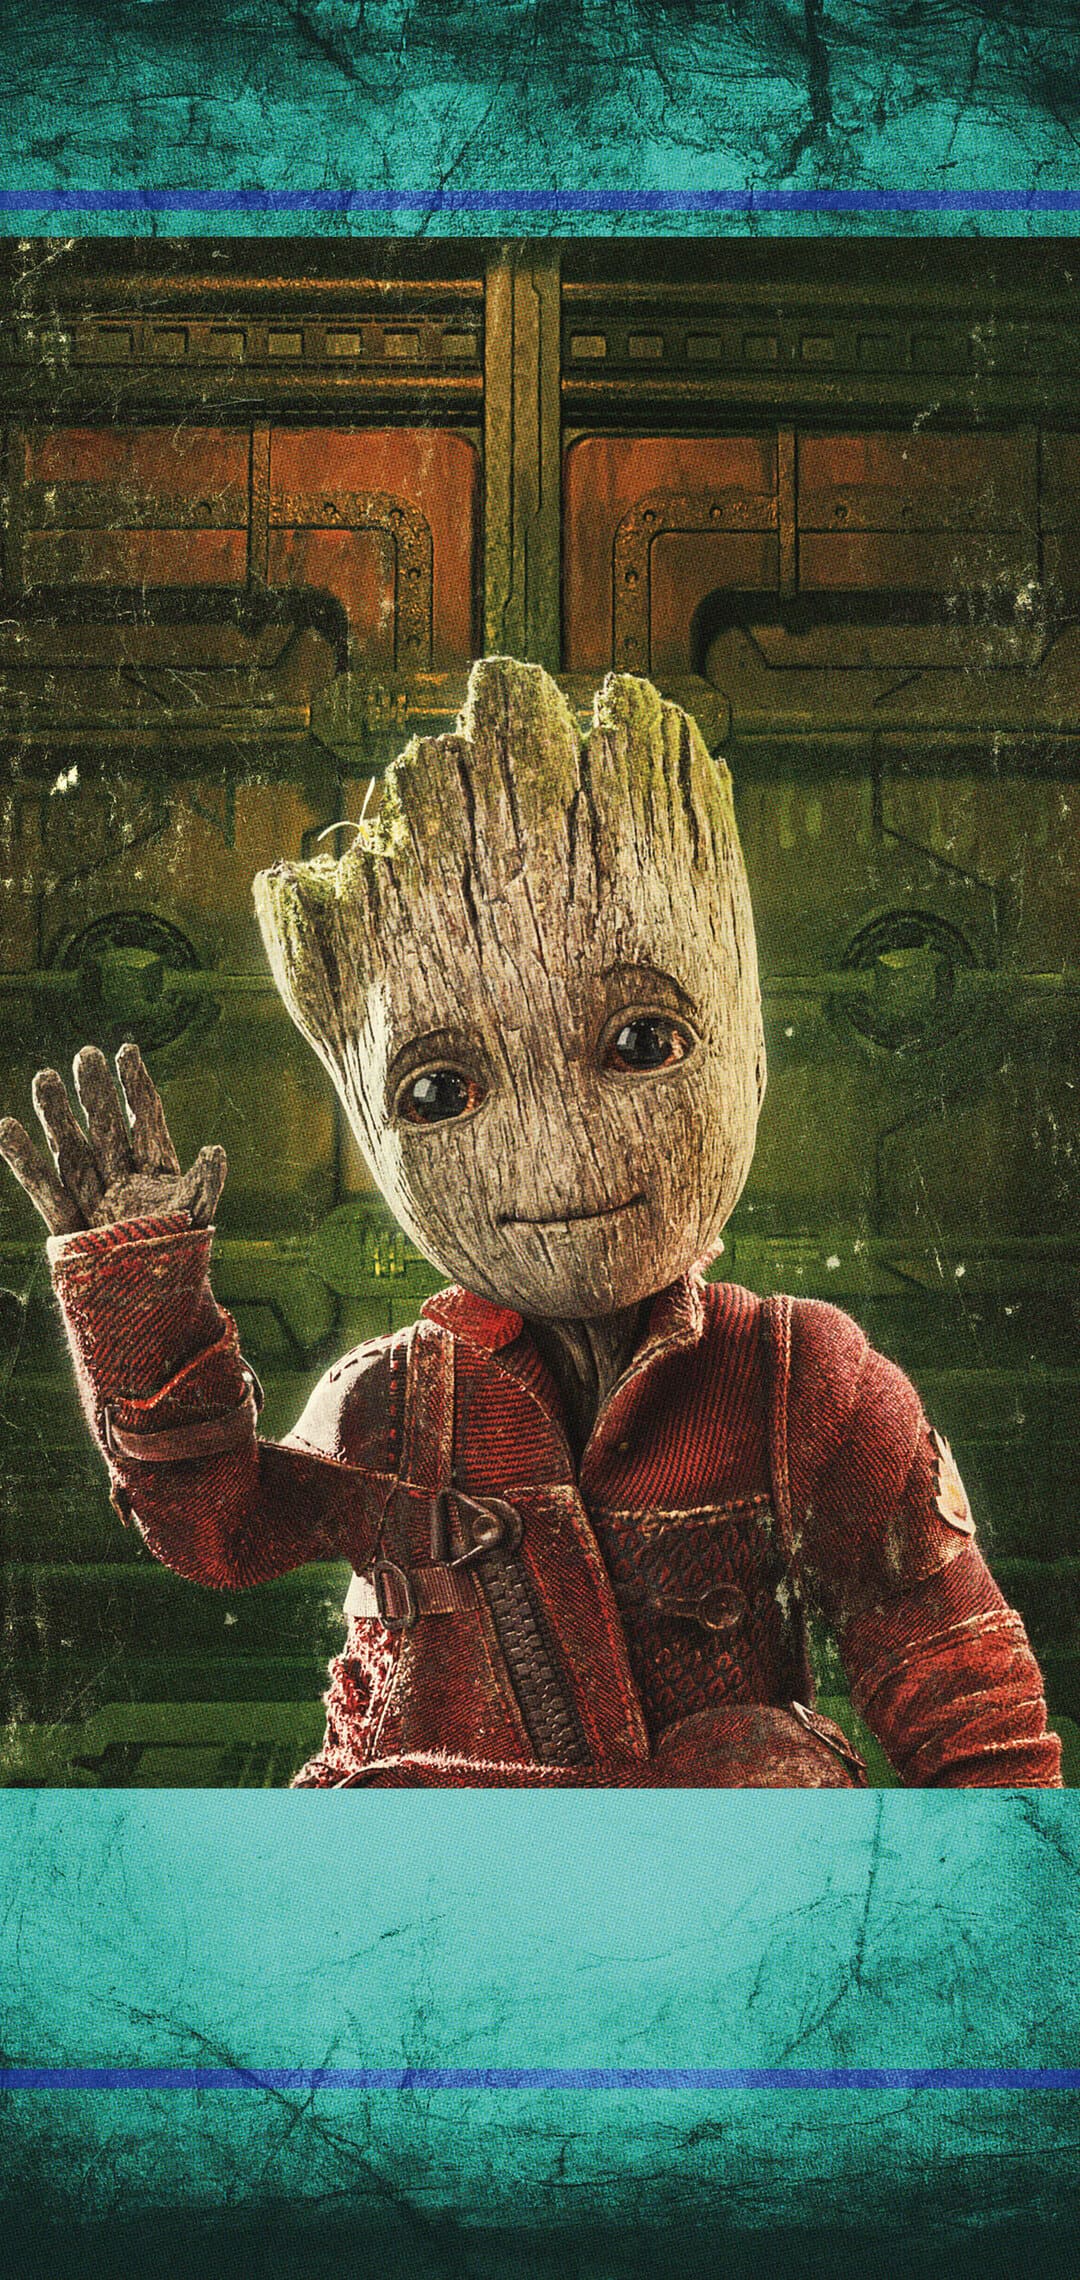 Baby Groot Empire Magazine Cover Wallpapers